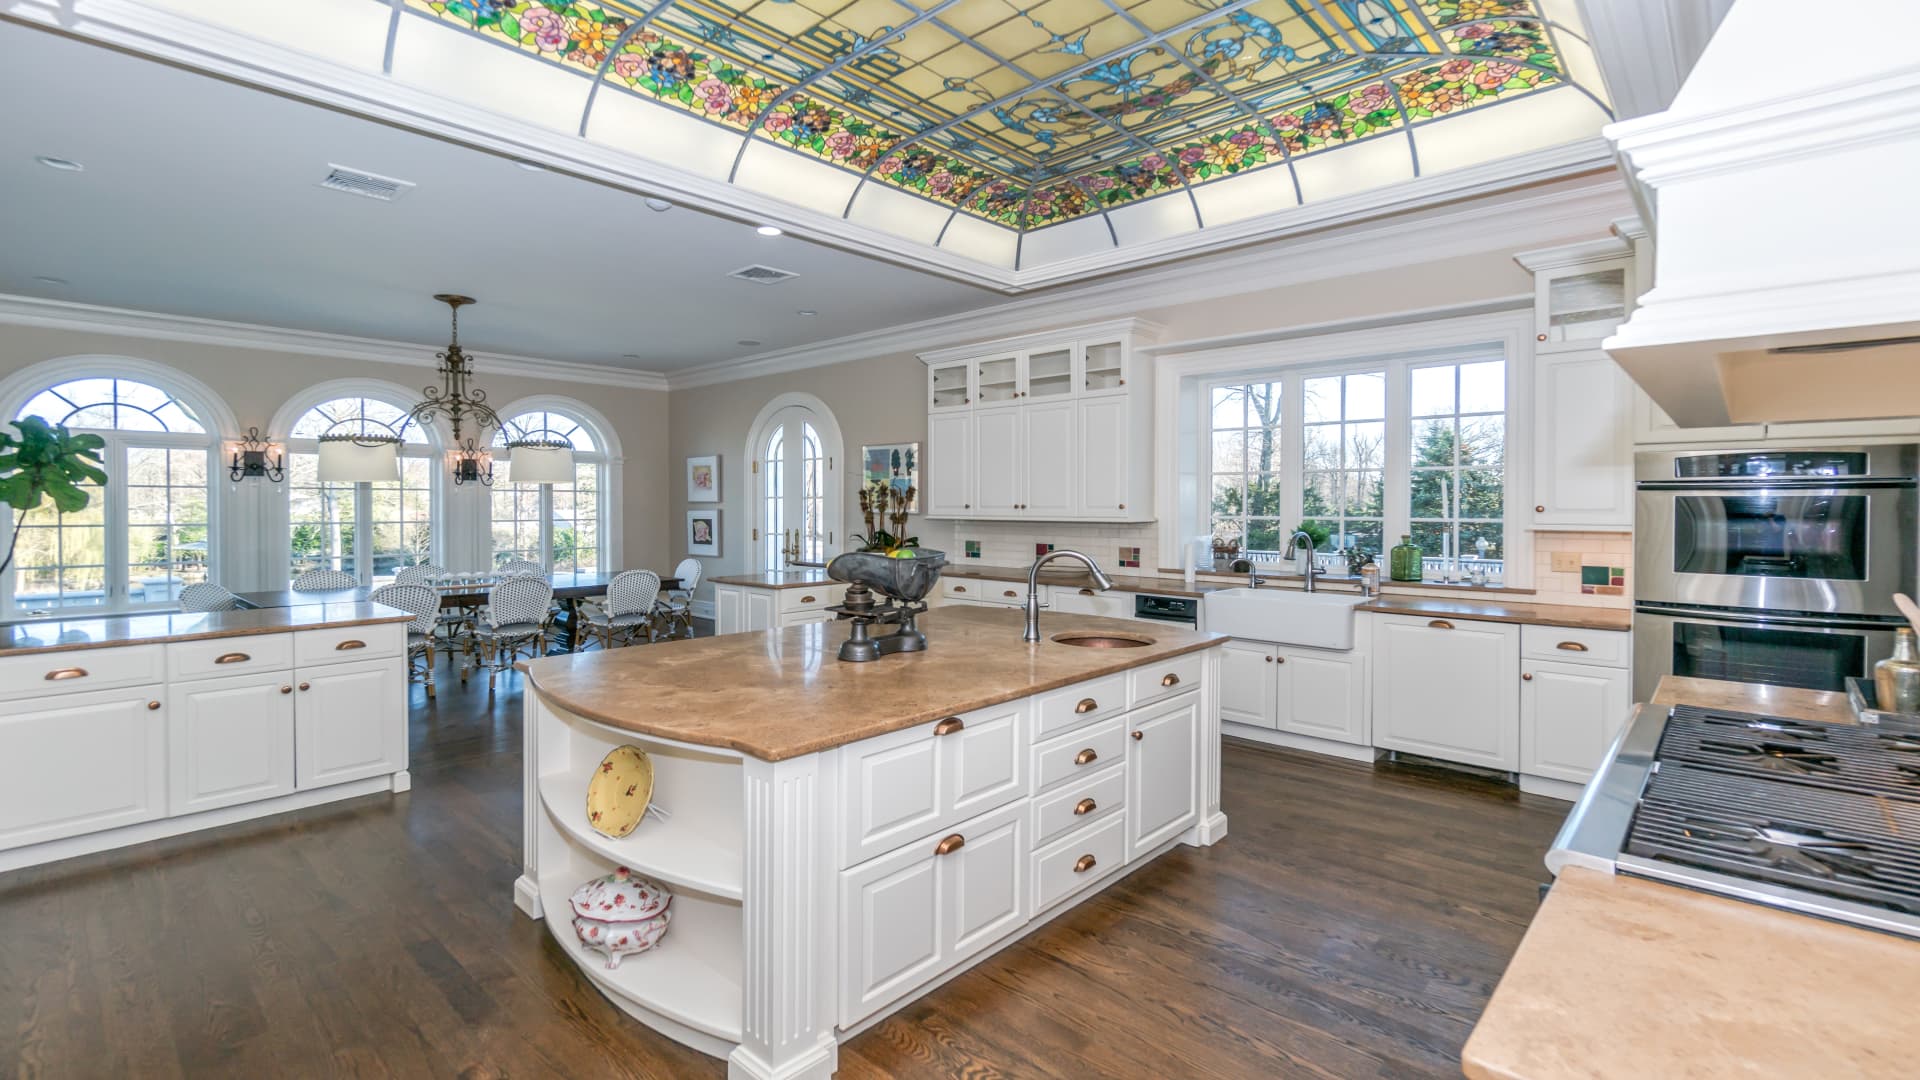 A recently updated kitchen includes colorful stained glass built into the ceiling.